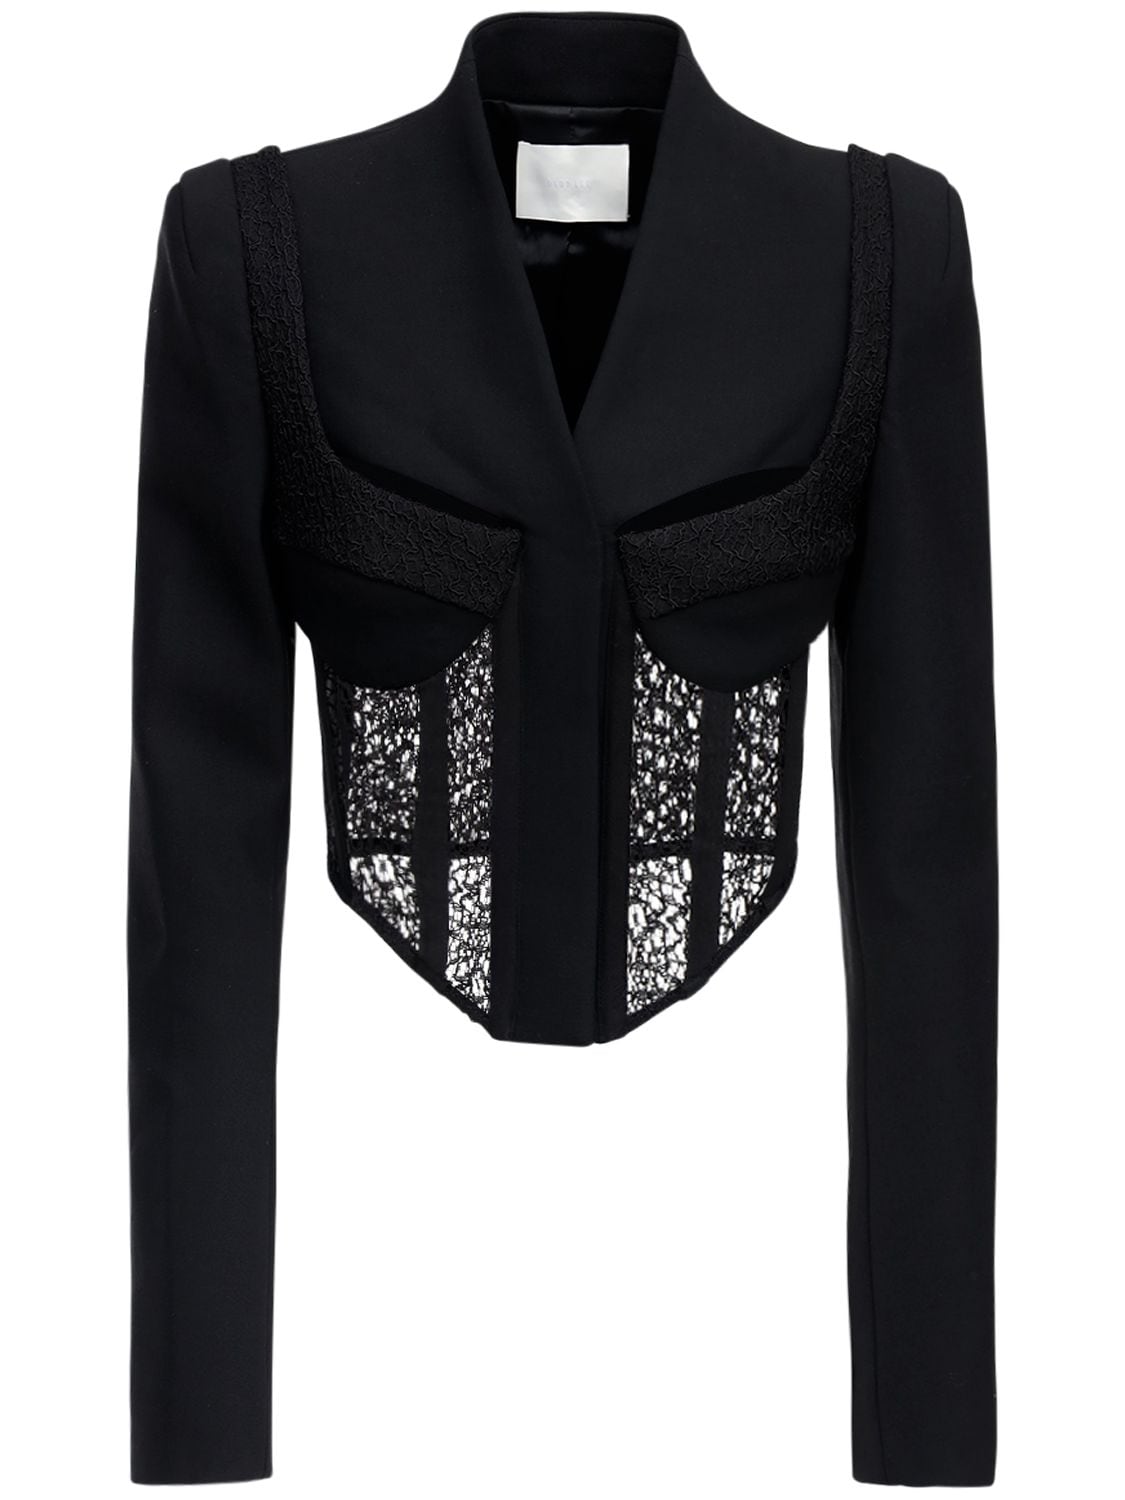 DION LEE TAILORED WOOL CORSET JACKET W/LACE,72IXYP007-QKXBQ0S1